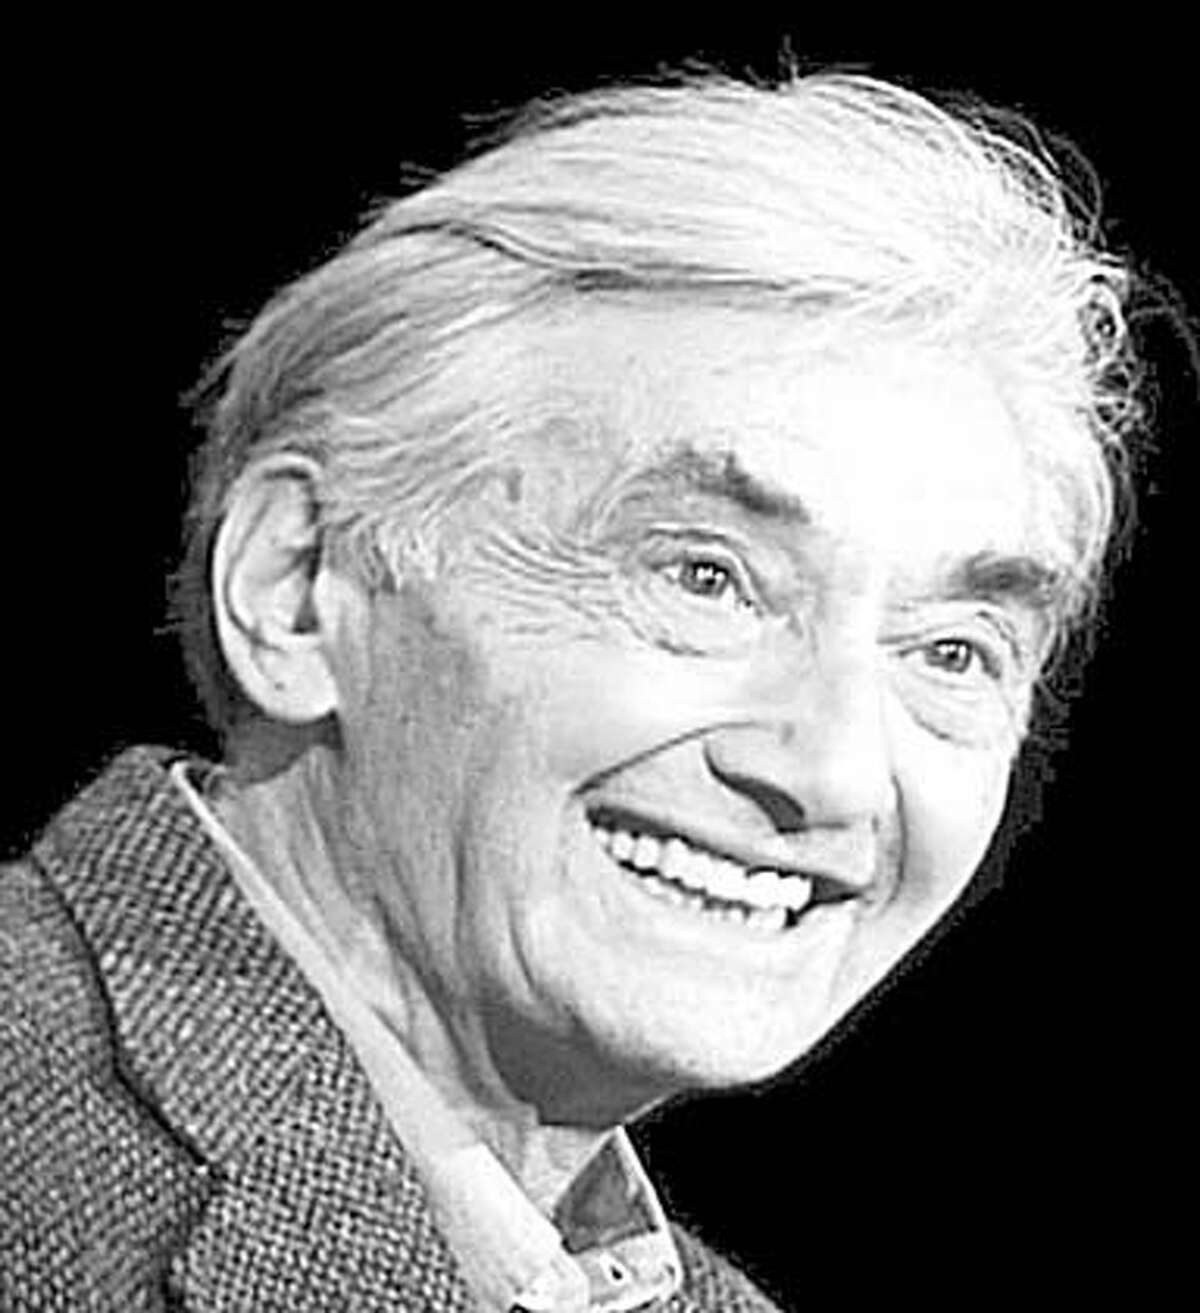 Howard Zinn is a professor emeritus at Boston University and author of "A People's History of the United States." Ran on: 10-13-2004 Howard Zinn being arrested at a protest in 1971. He was arrested several times during the Vietnam War. Datebook#Datebook#Chronicle#10/15/2004#ALL#Advance##0422407539